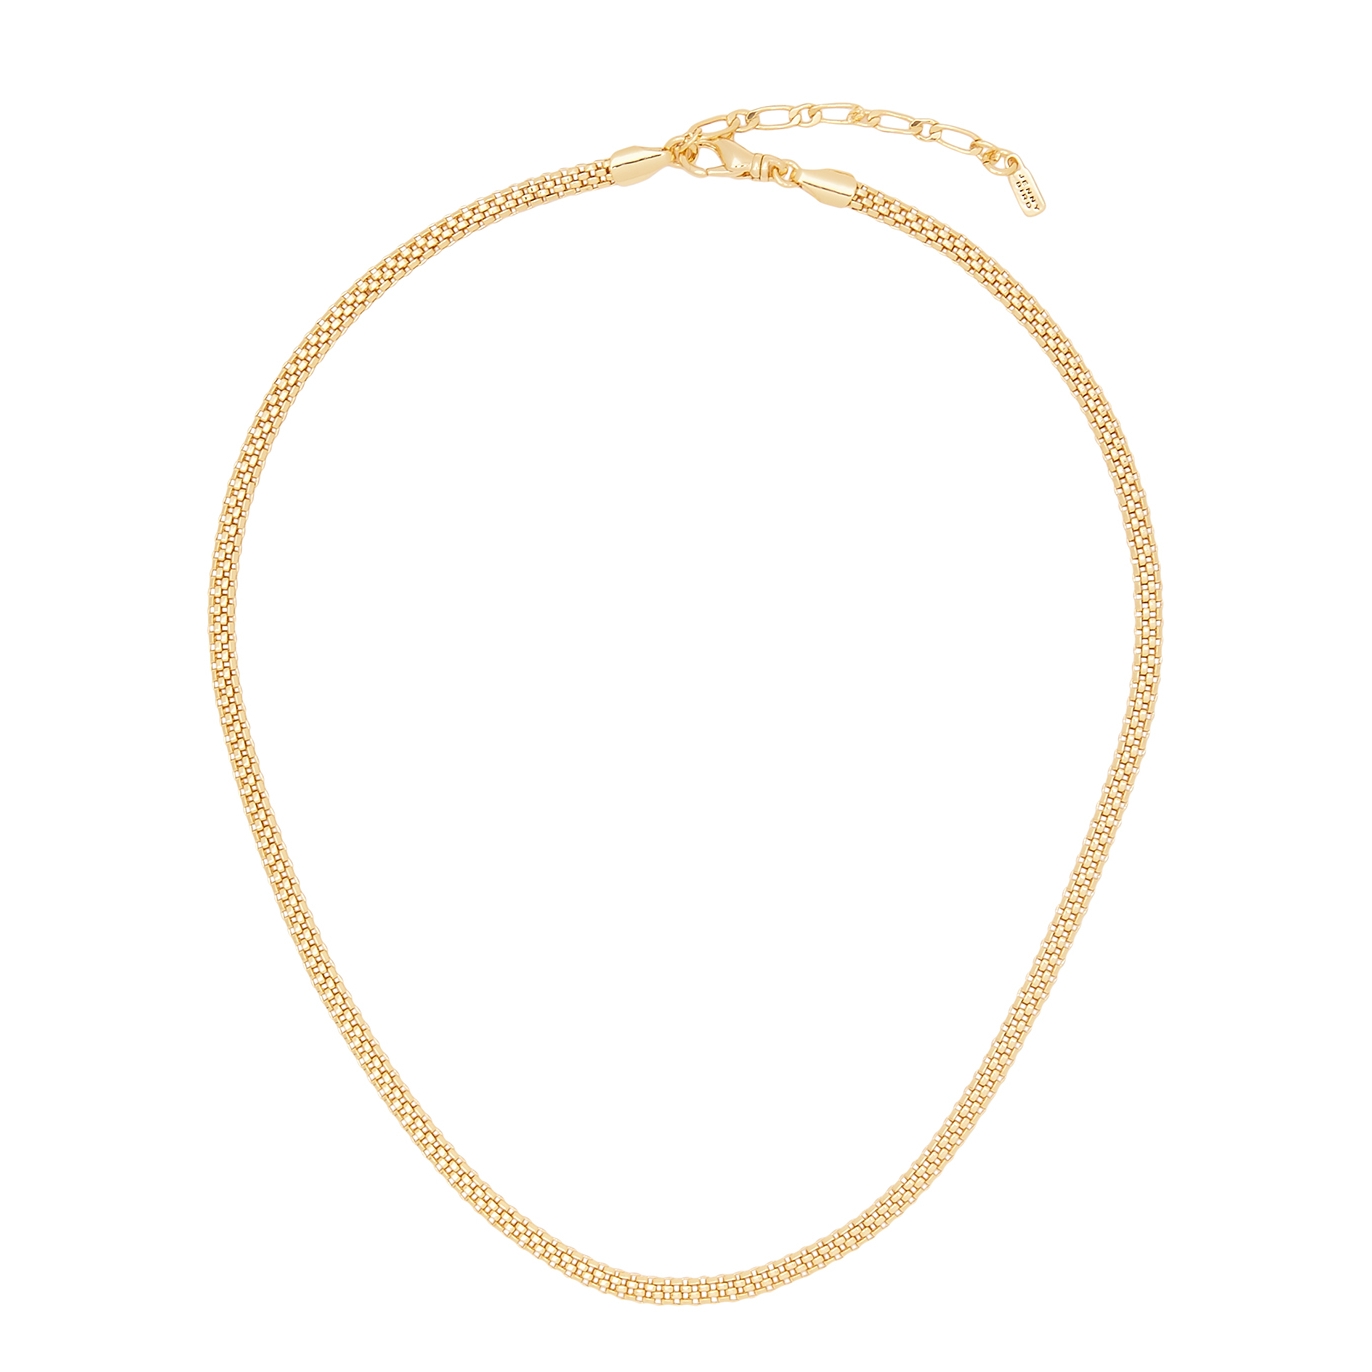 Jenny Bird Maren 14kt Gold-dipped Necklace - One Size